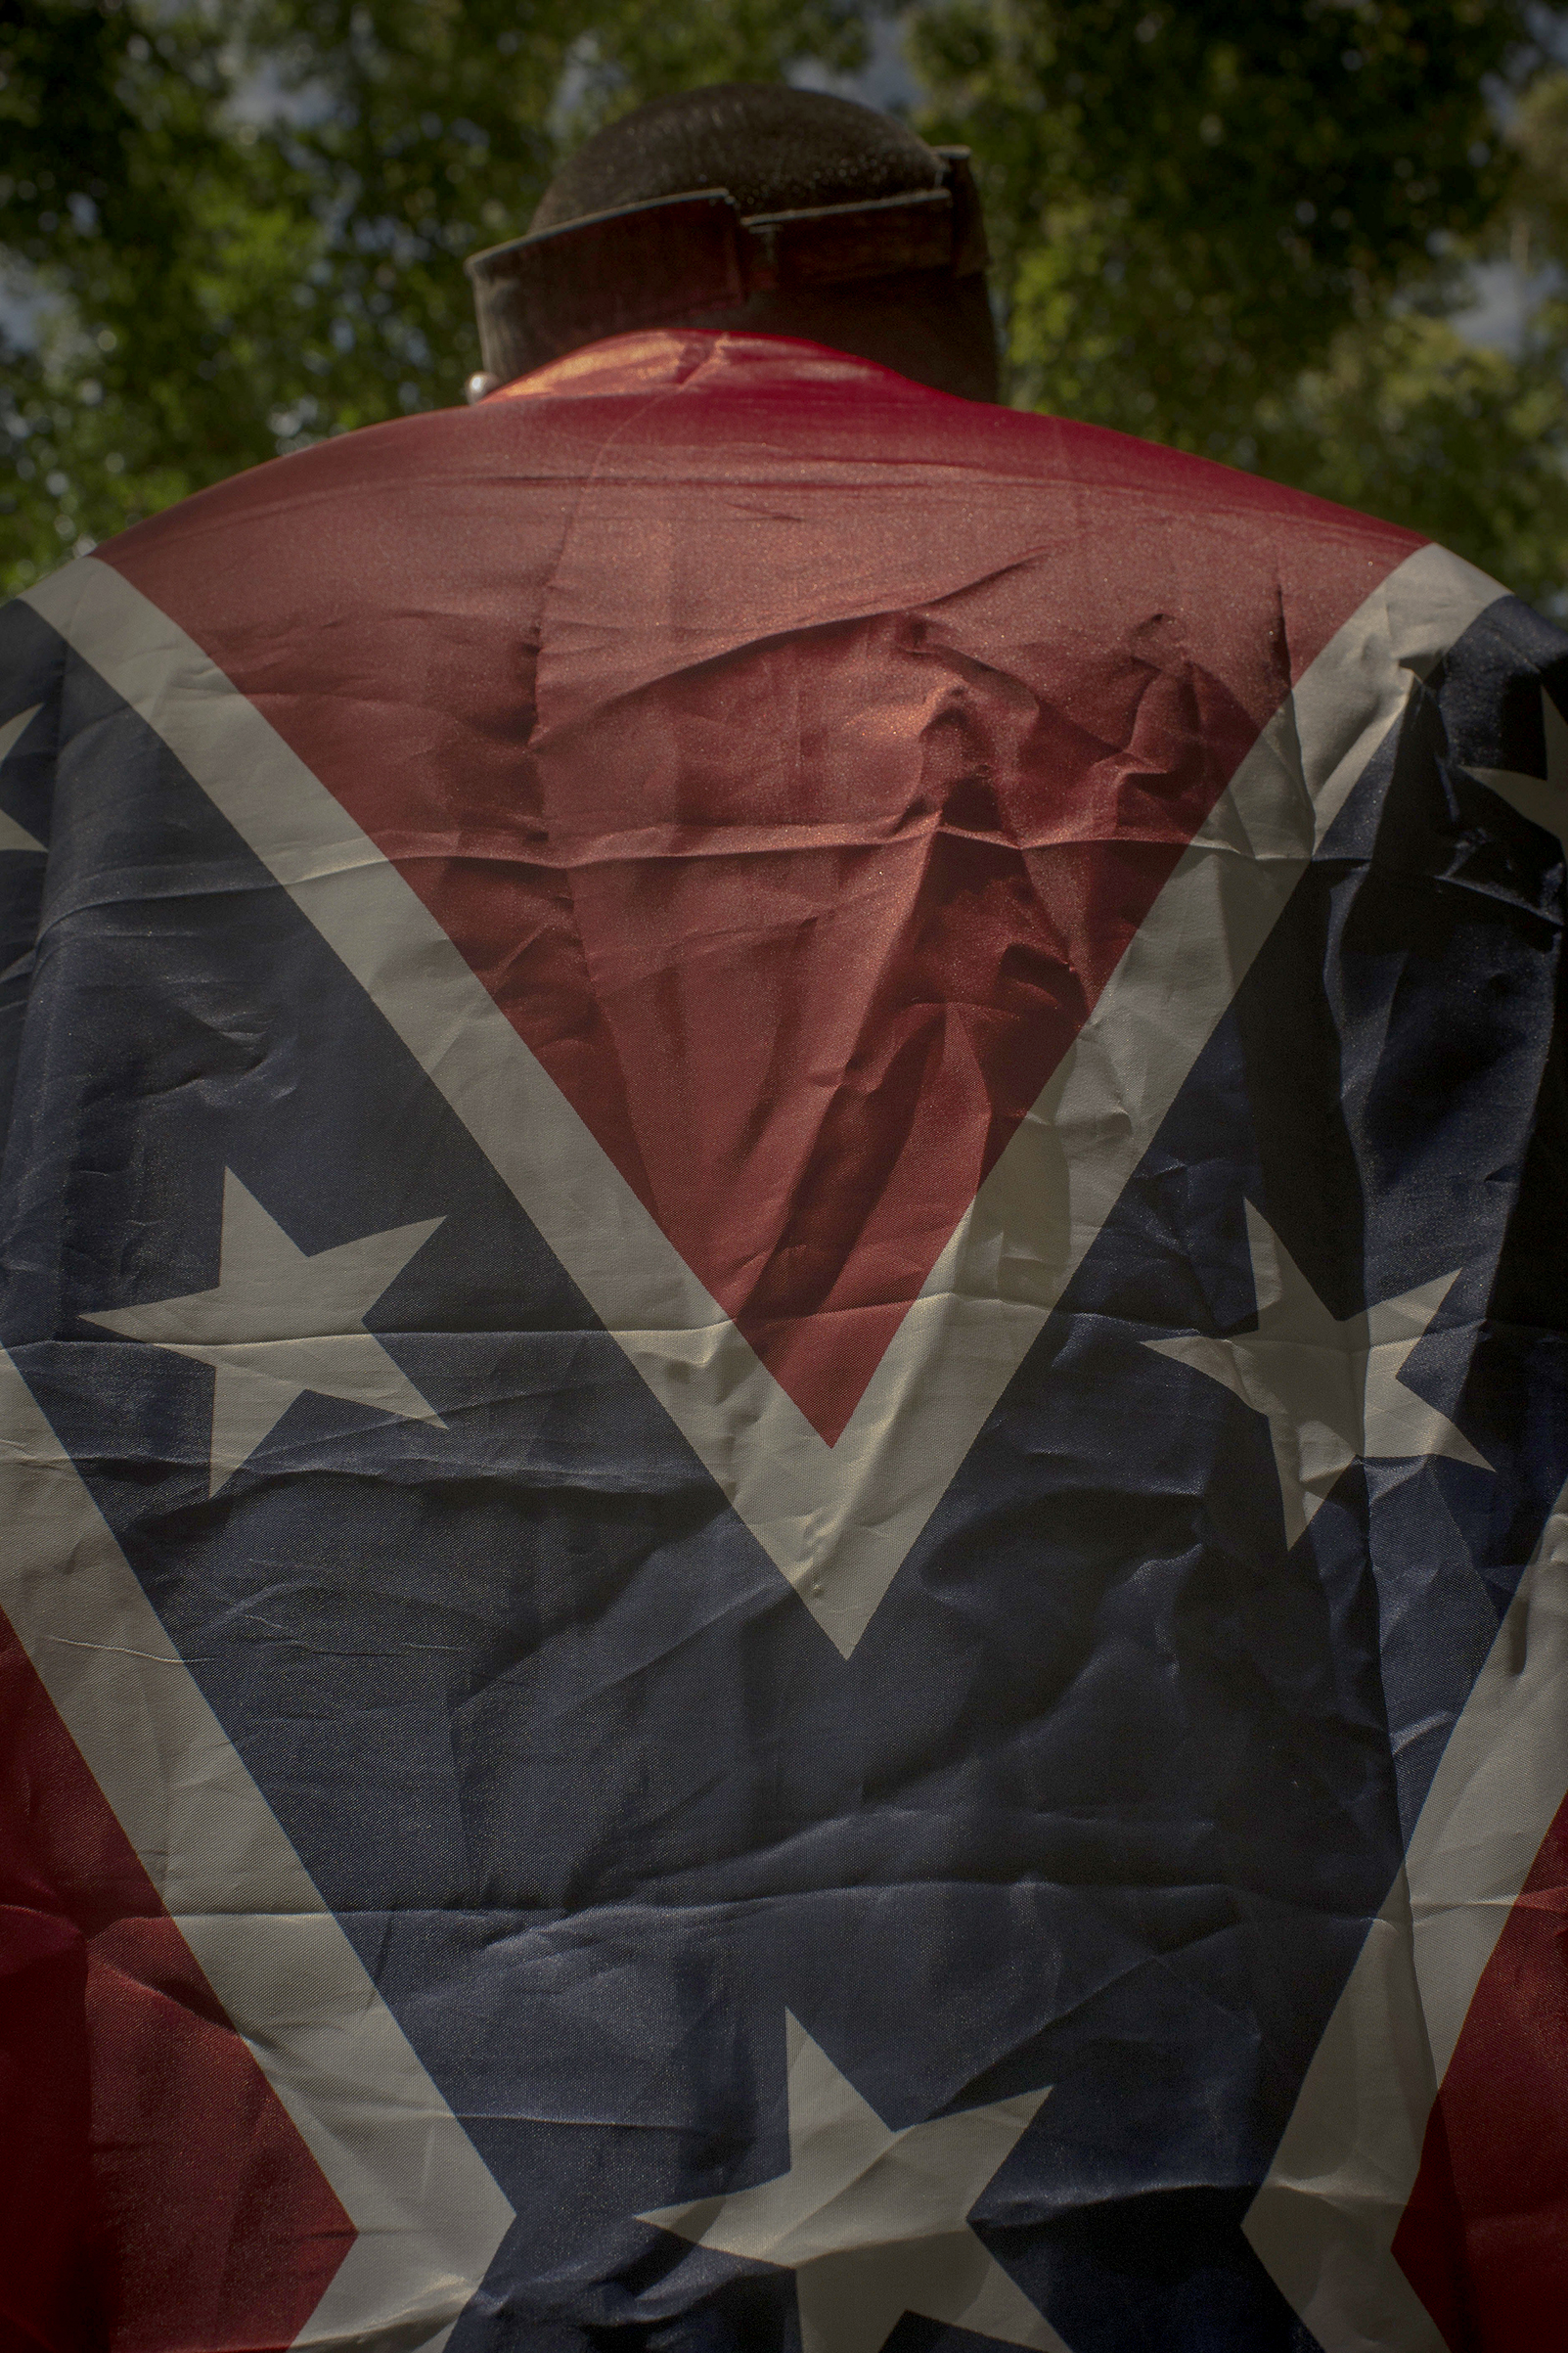 A Unite the Right protester drapes himself in a Confederate flag during a KKK rally in Charlottesville, Va., on July 8, 2017.